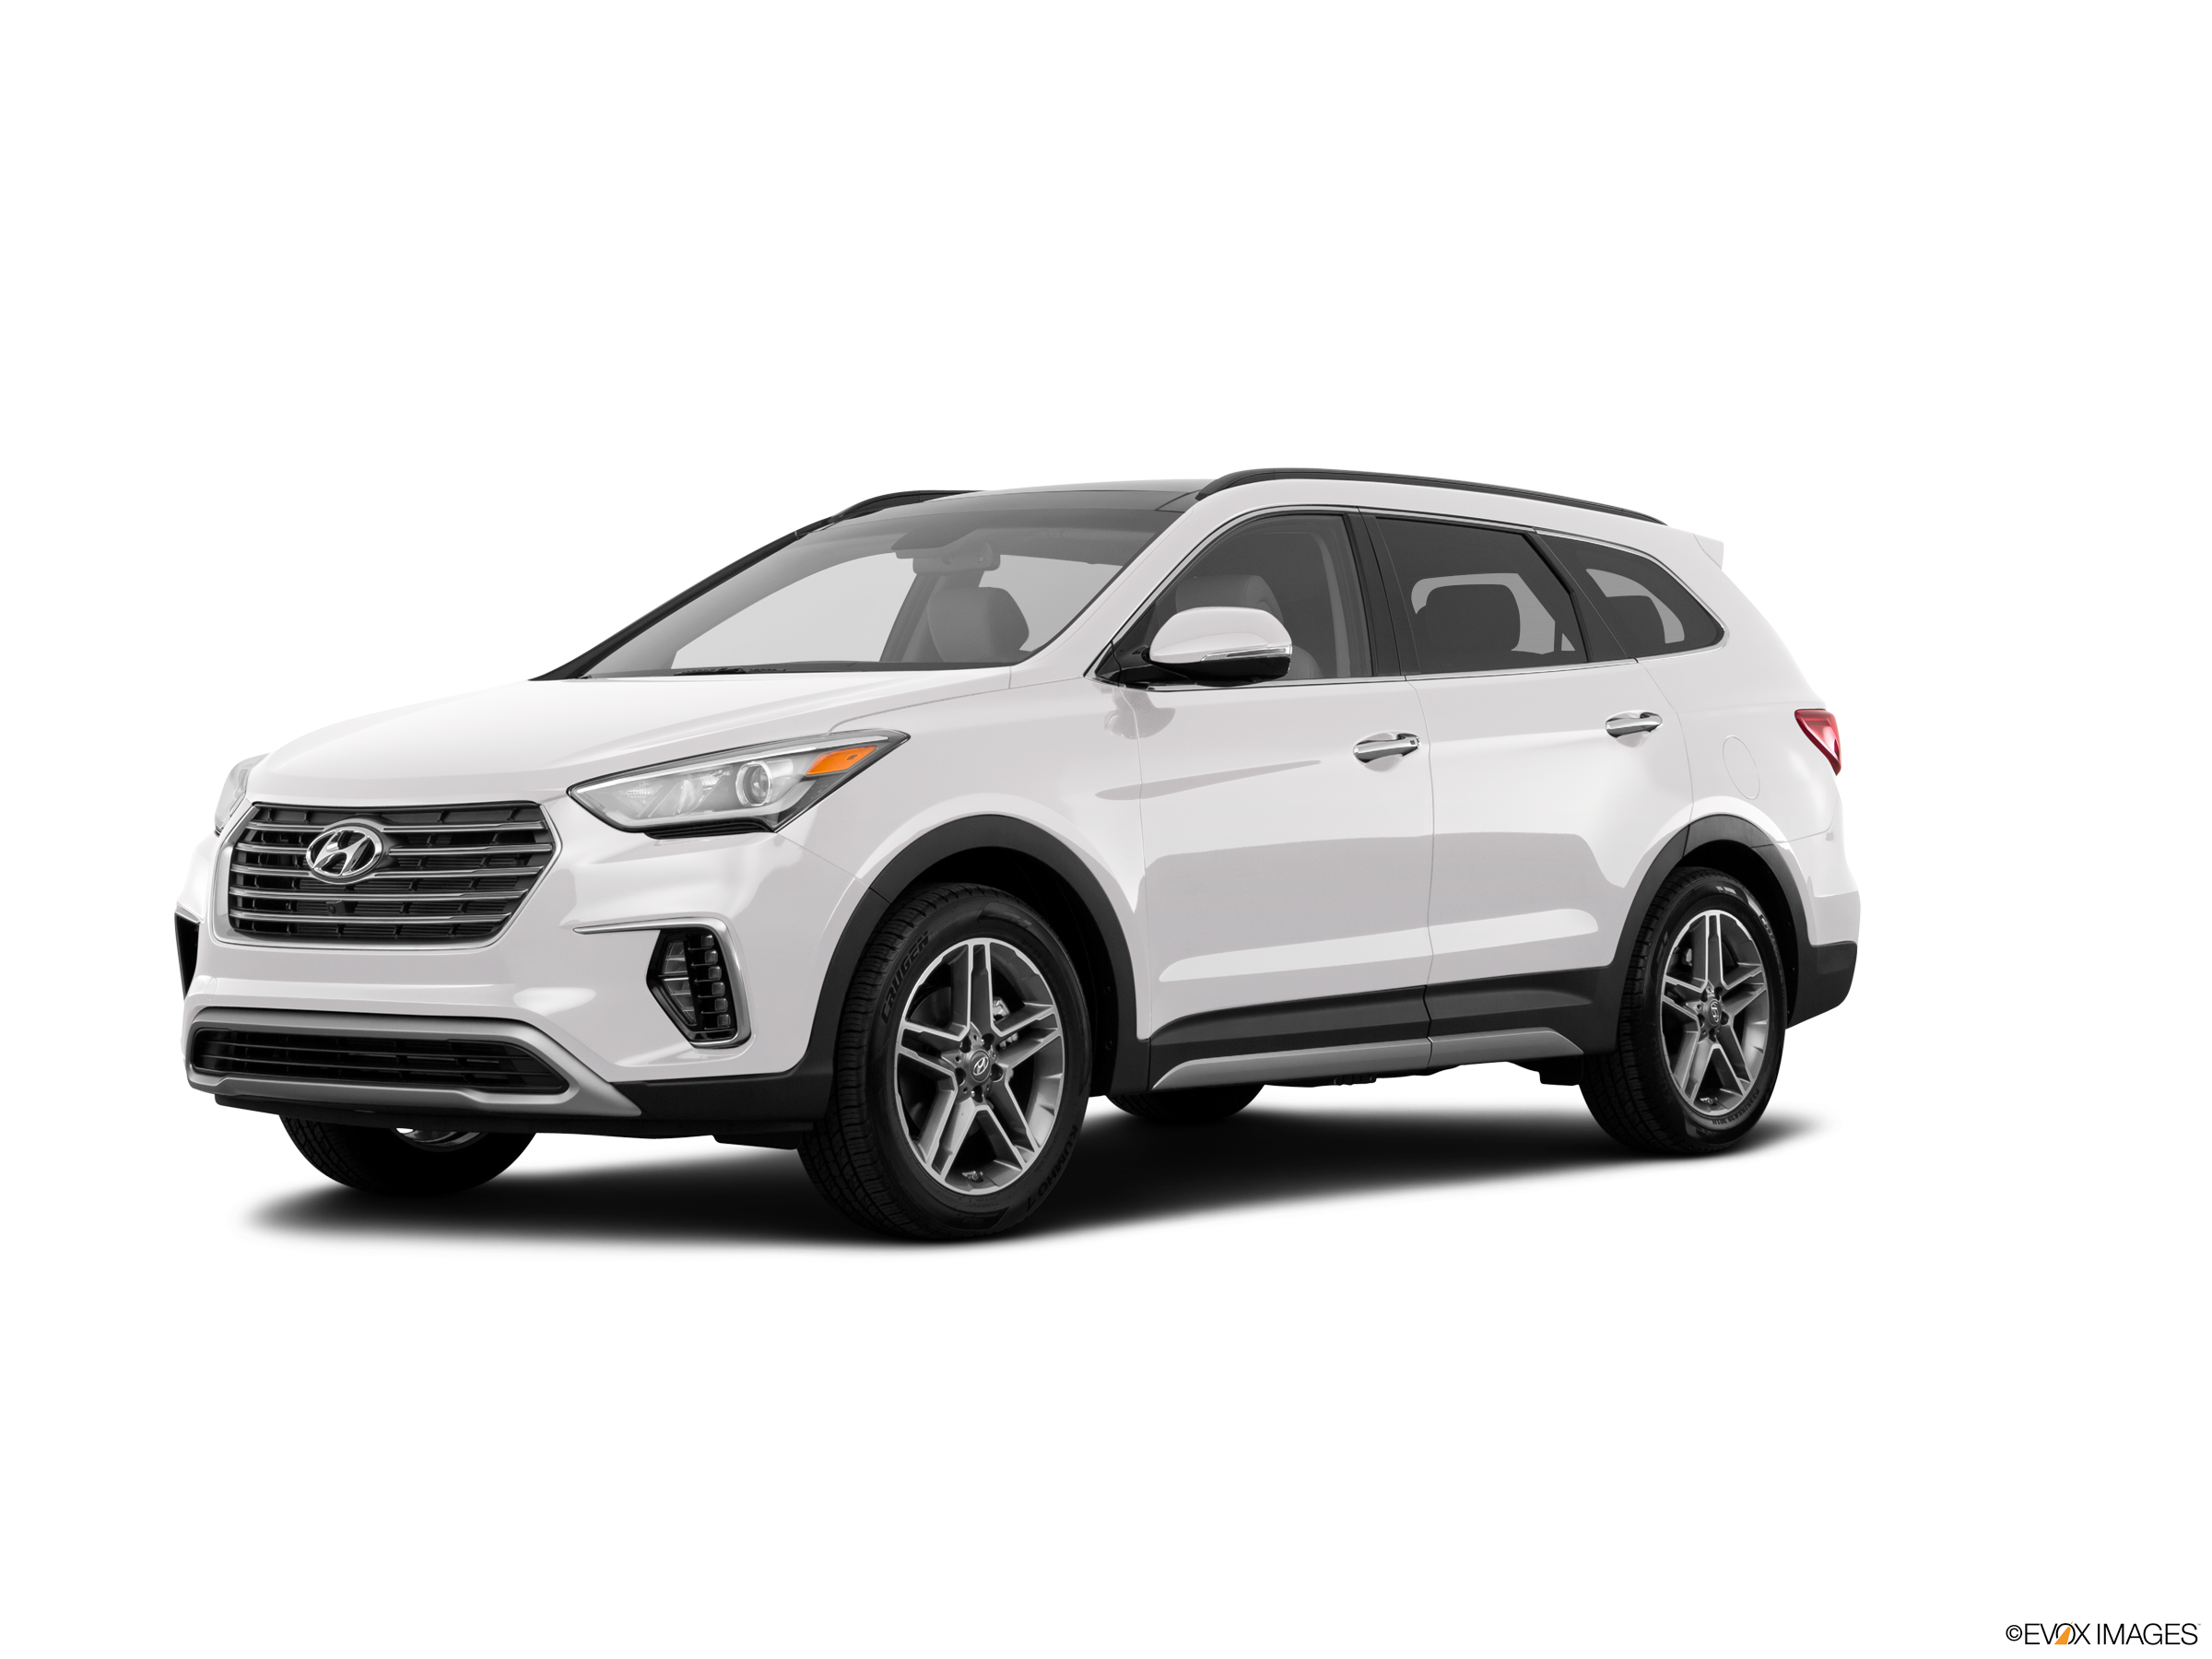 Hyundai Used Limited Book Ultimate Sport 2018 Kelley Prices | Blue 4D Santa Utility Fe